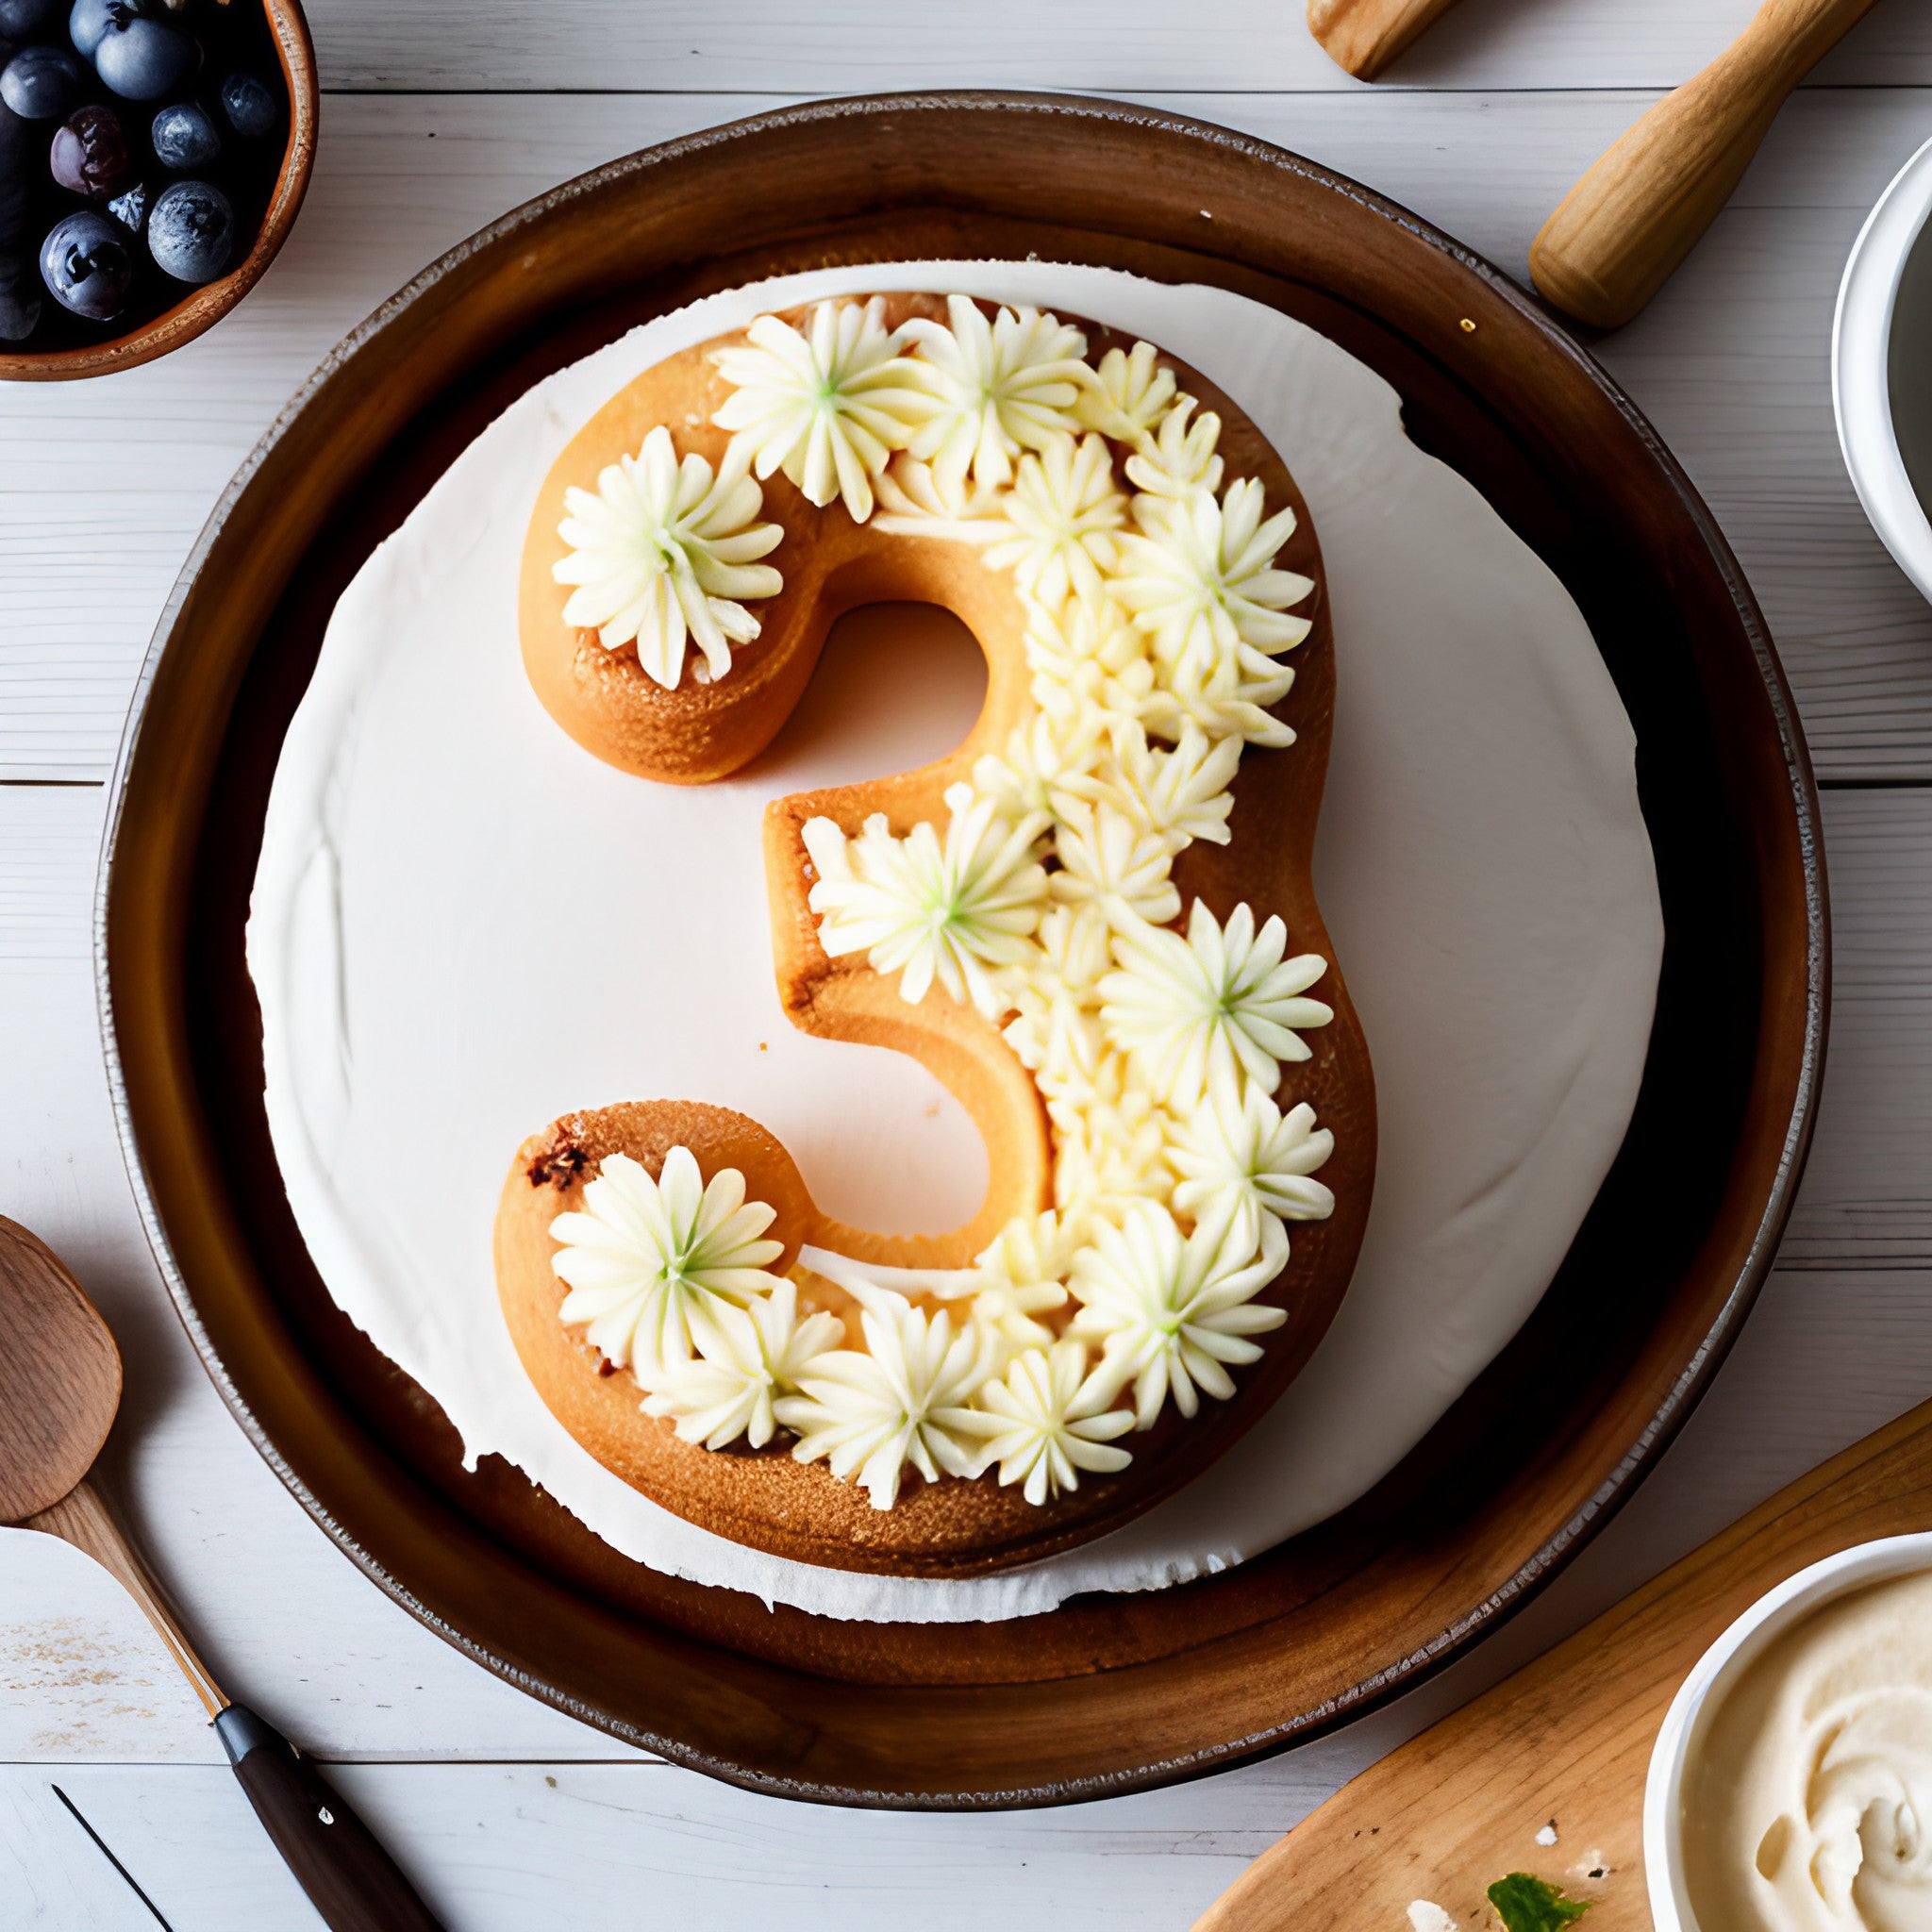 How to Use the Letters and Numbers Cake Pan | Wilton's Baking Blog |  Homemade Cake & Other Baking Recipes